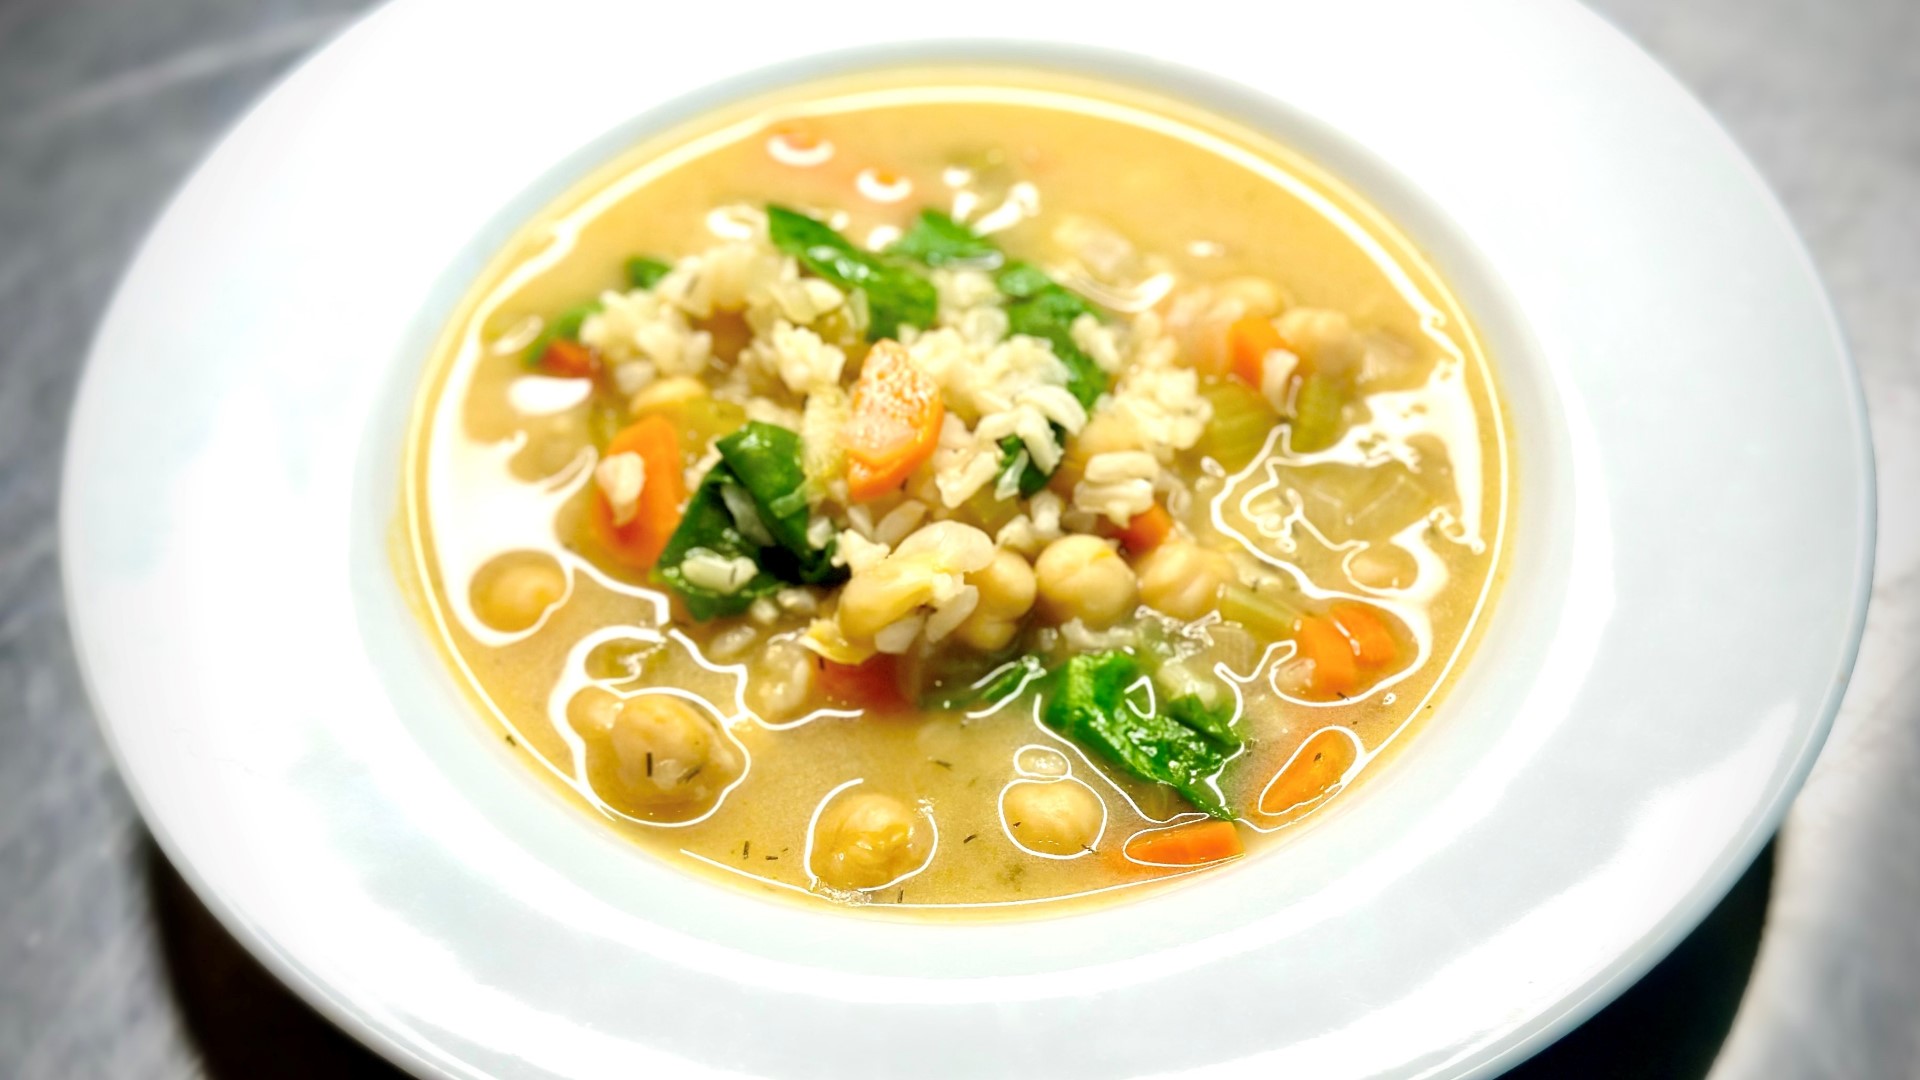 Warm up with this delicious chickpea rice soup! 10TV's Brittany Bailey brings you one of her favorite soups in honor of soup season.